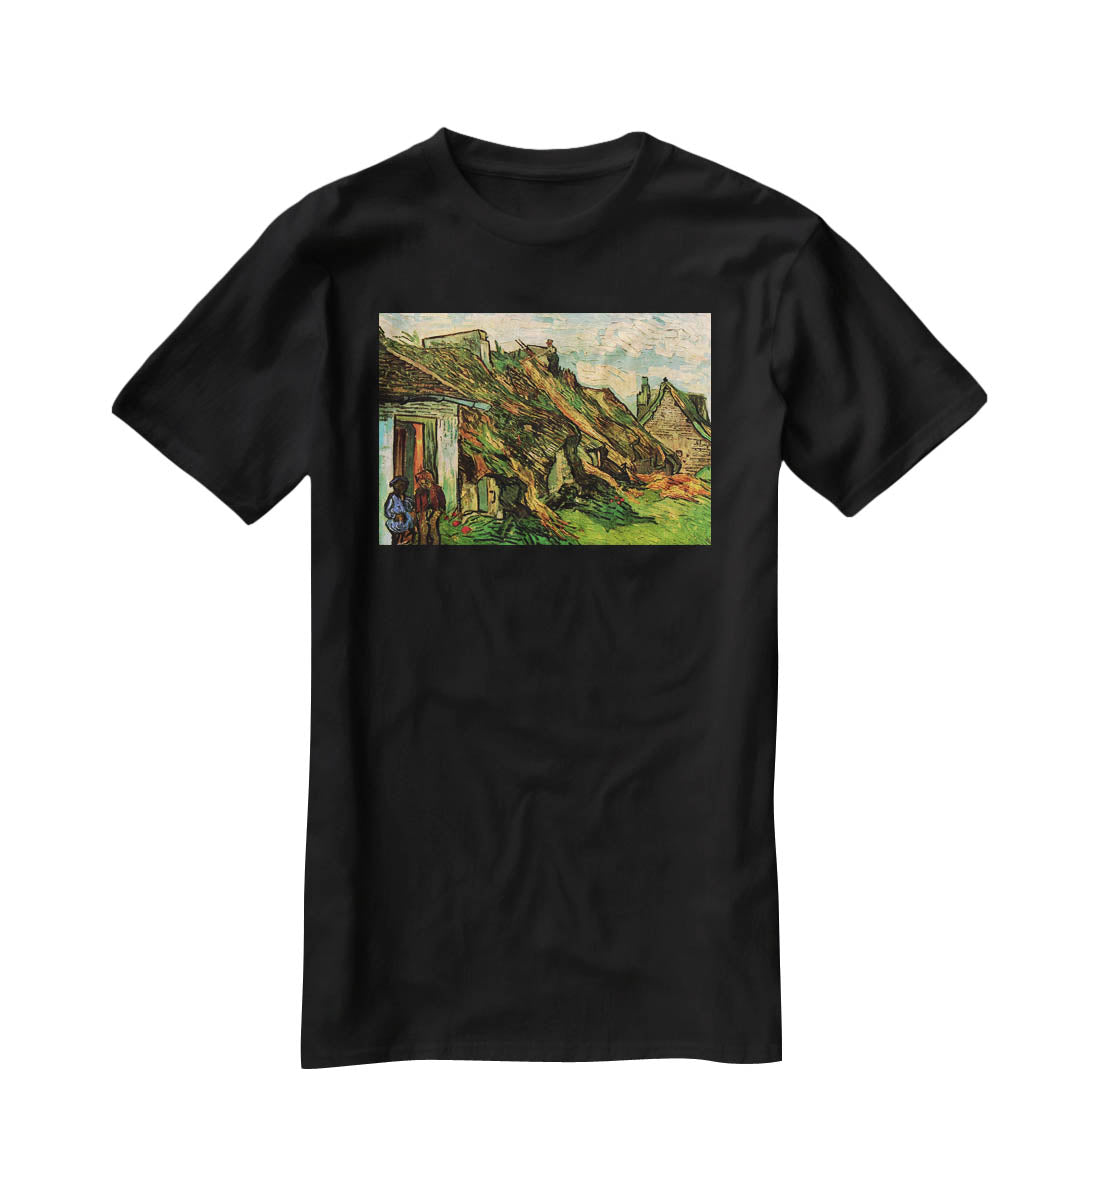 Thatched Sandstone Cottages in Chaponval by Van Gogh T-Shirt - Canvas Art Rocks - 1